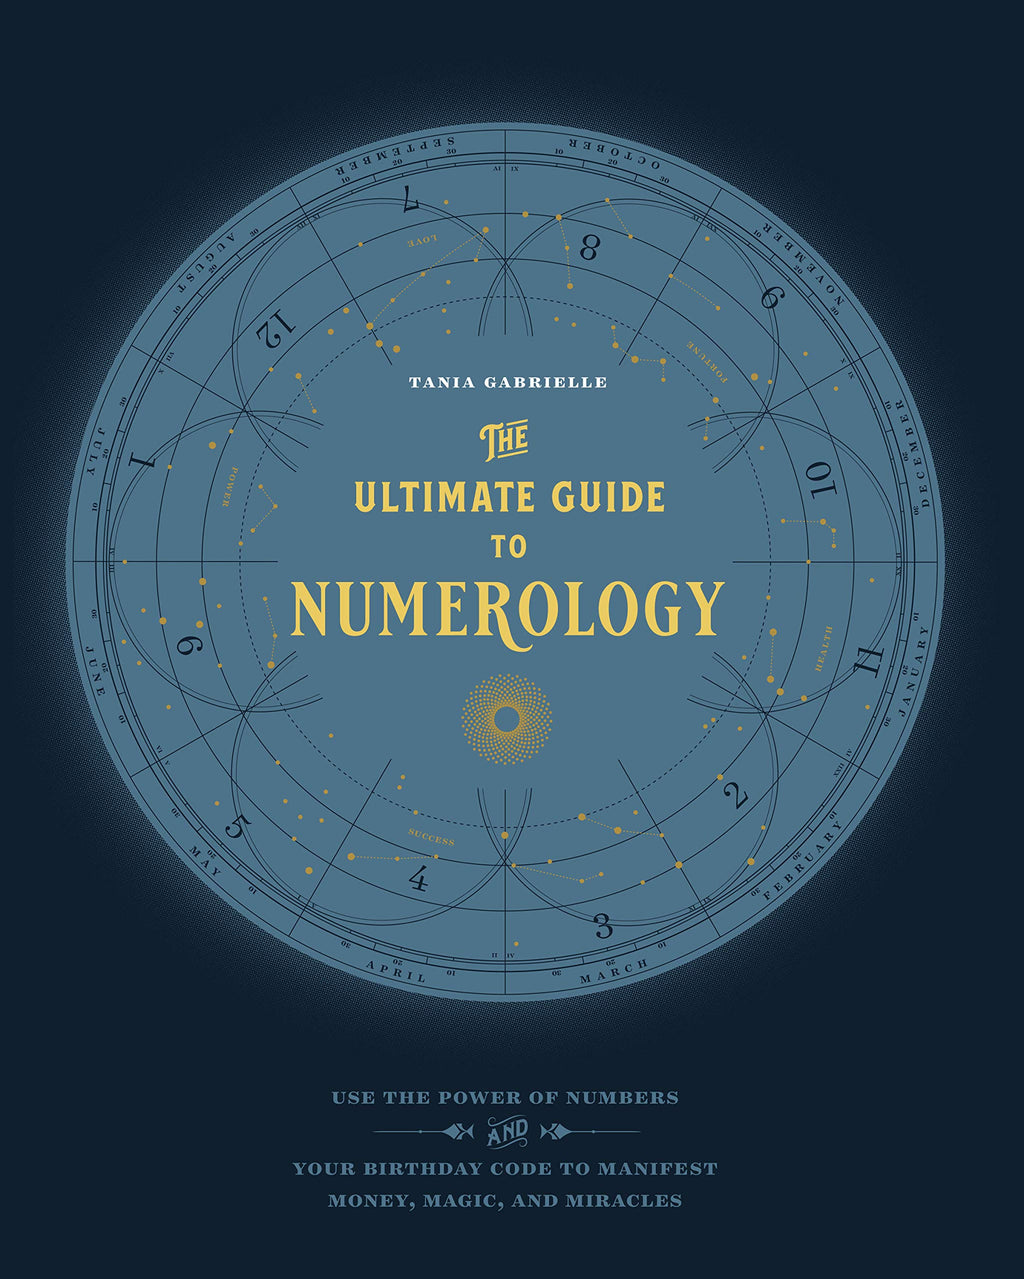 Ultimate Guide to Numerology by Tania Gabrielle